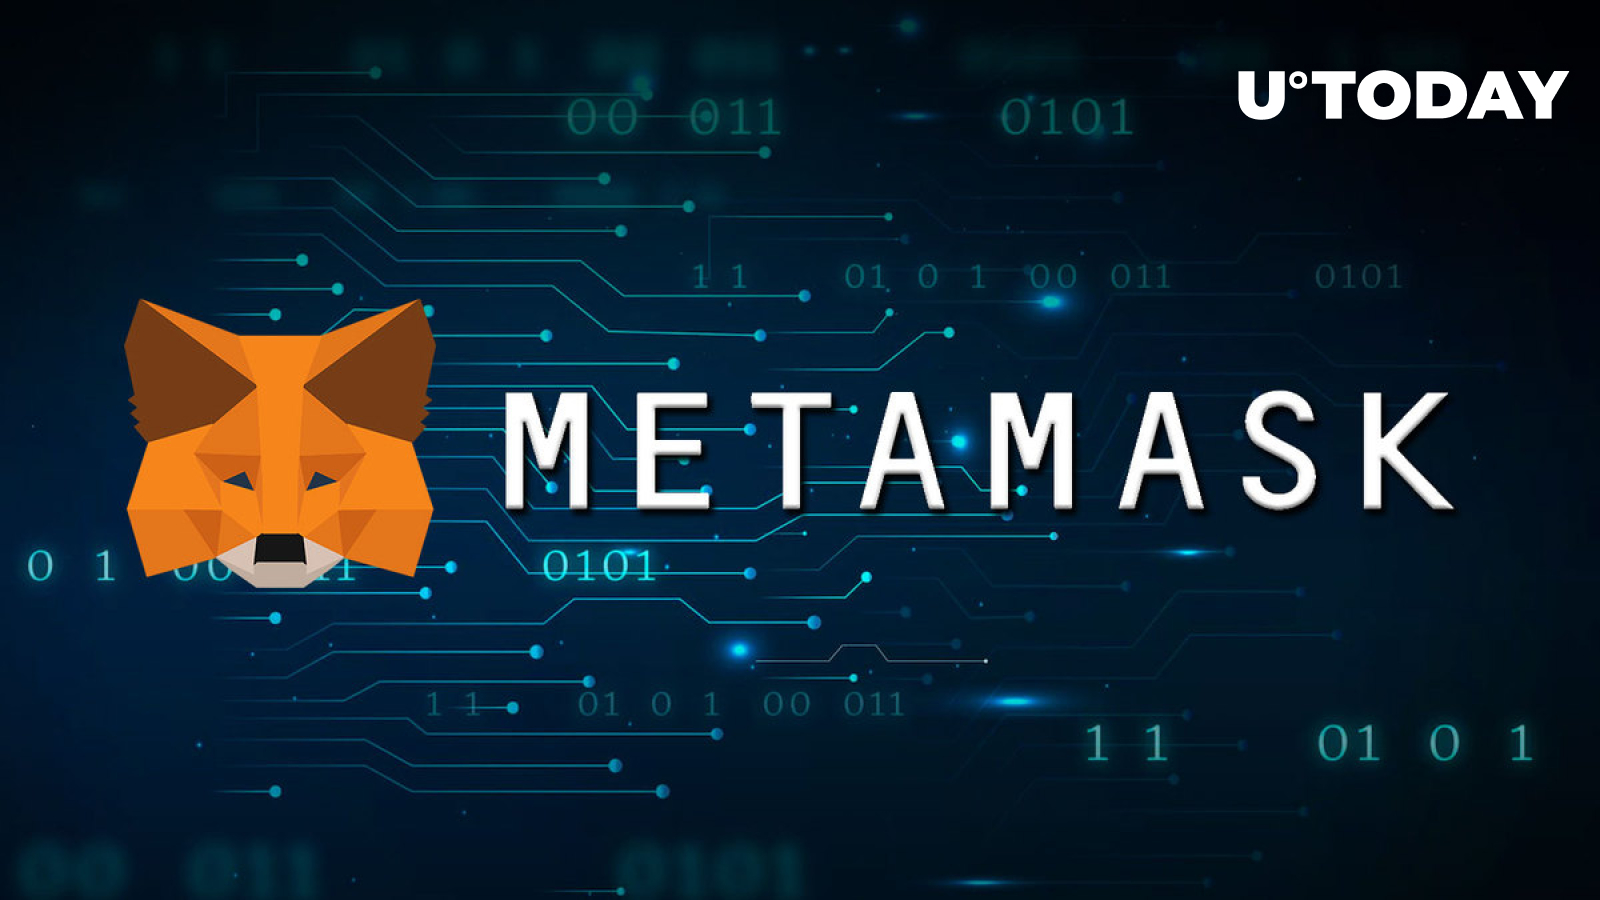 Here’s What Your MetaMask Crypto Wallet Knows About You